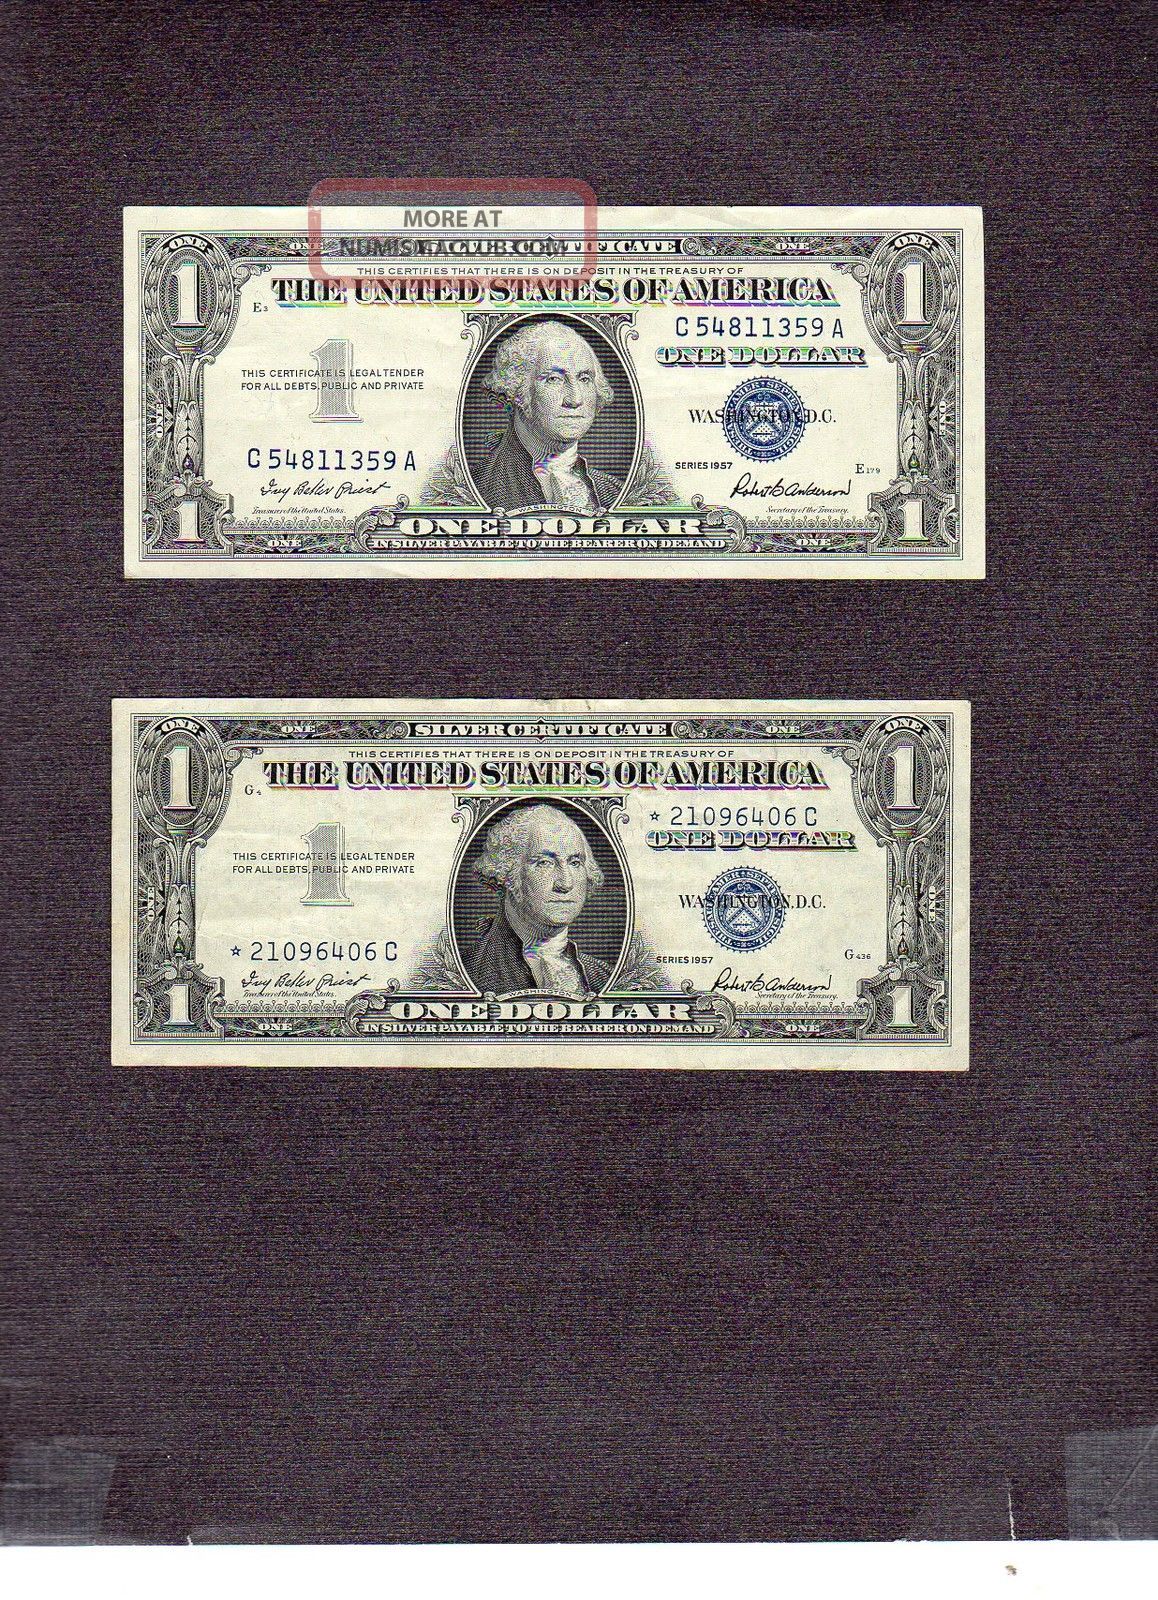 1957 star note lookup